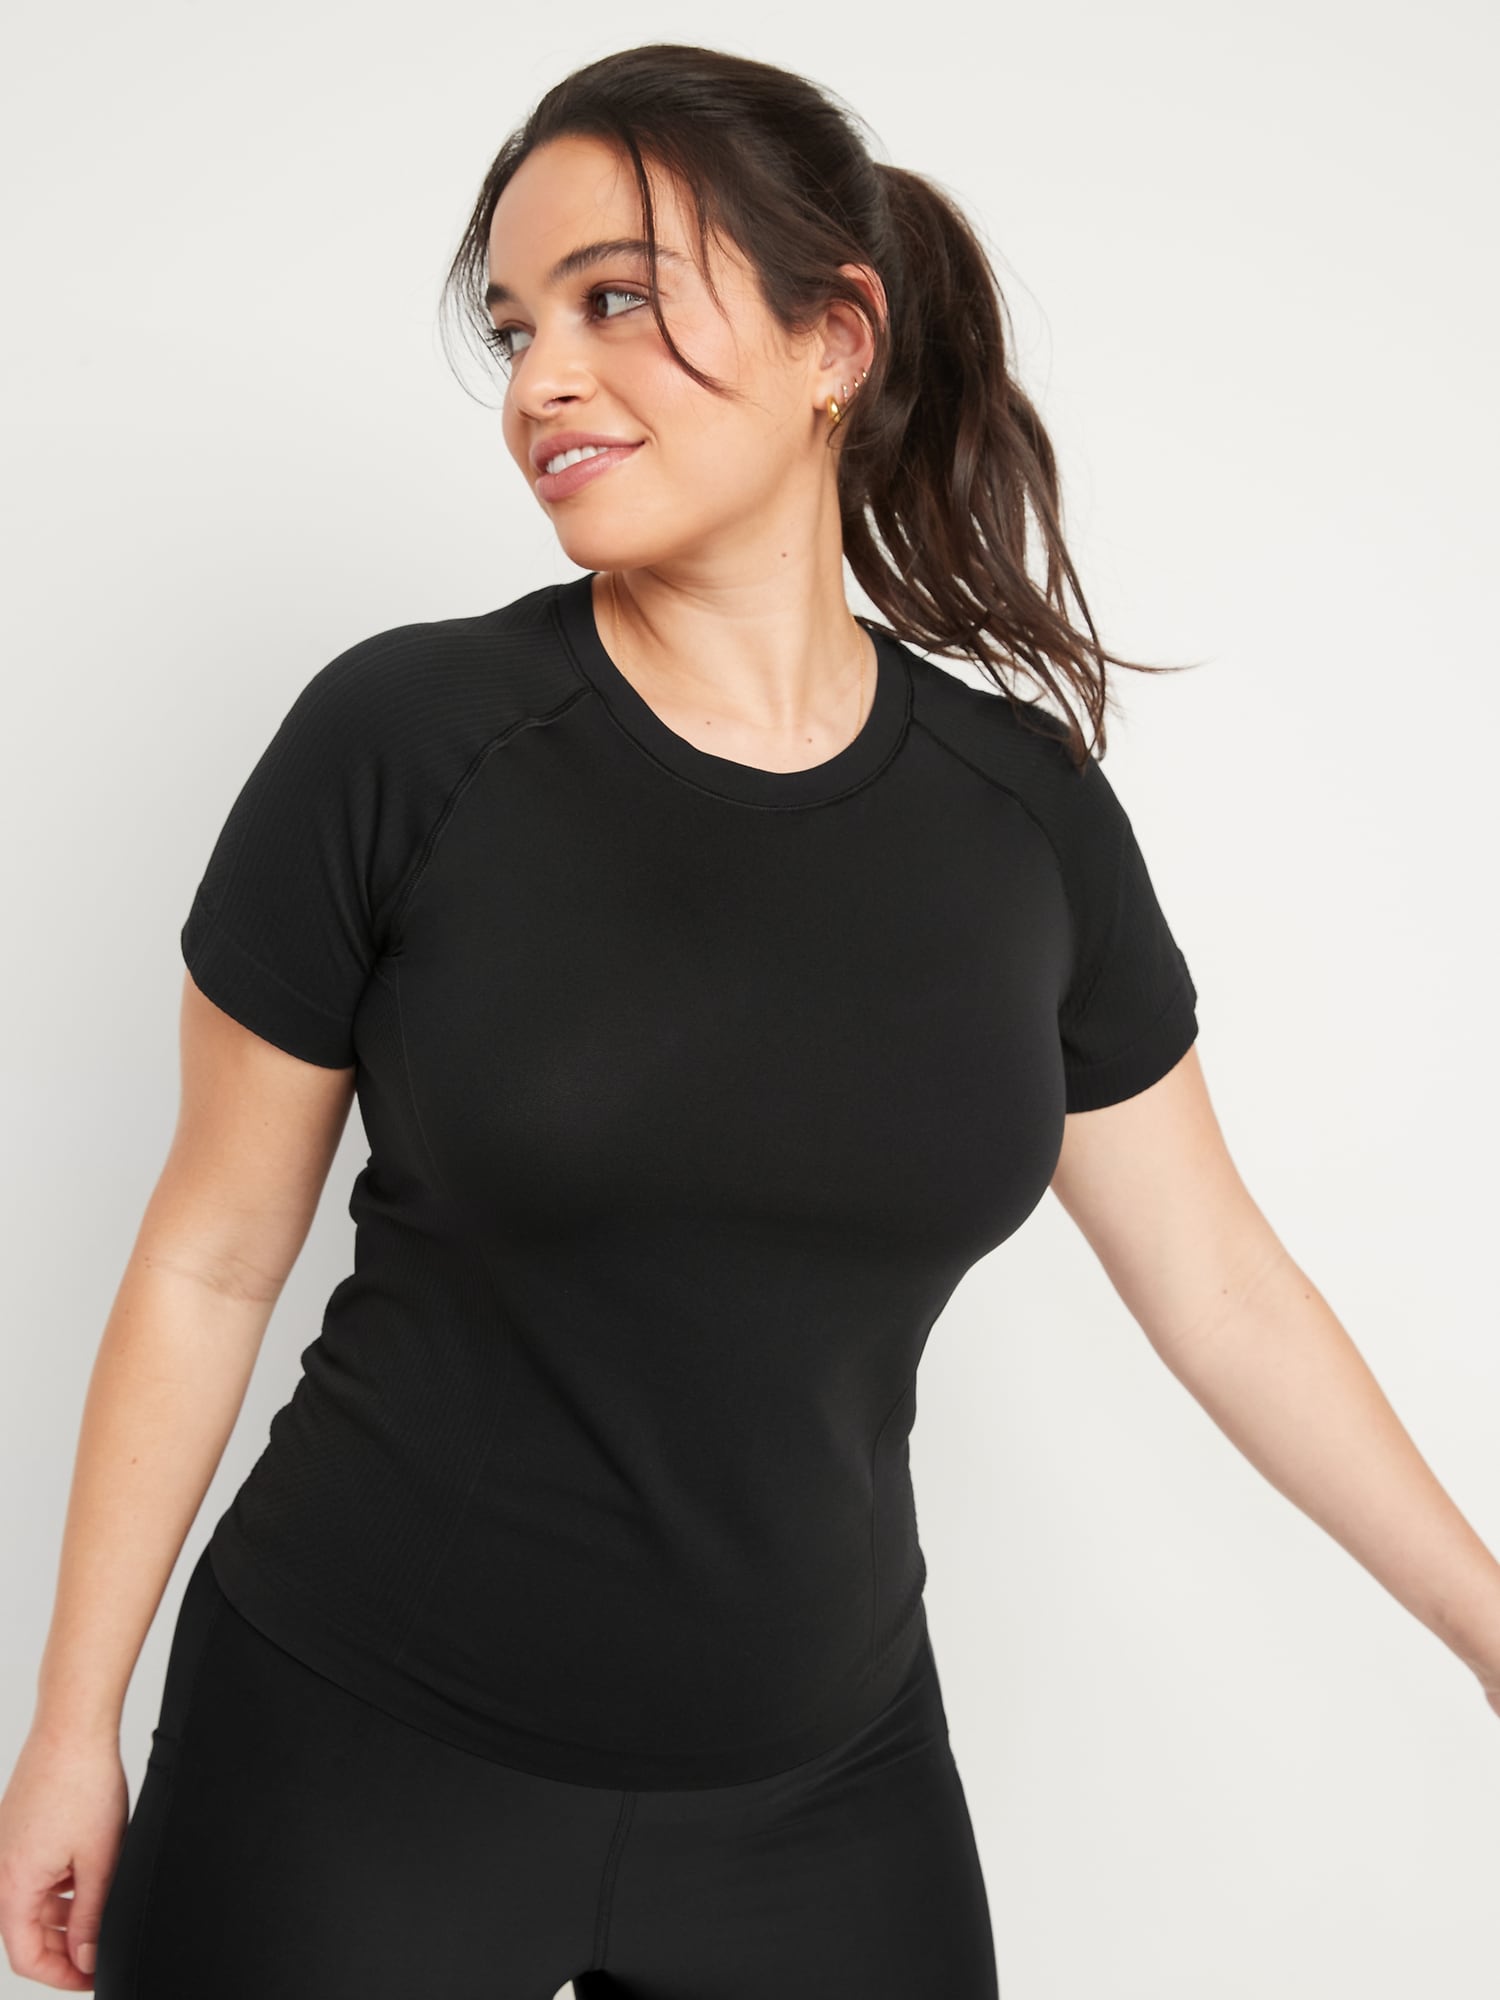 Fitted Seamless Performance T-Shirt | Old Navy